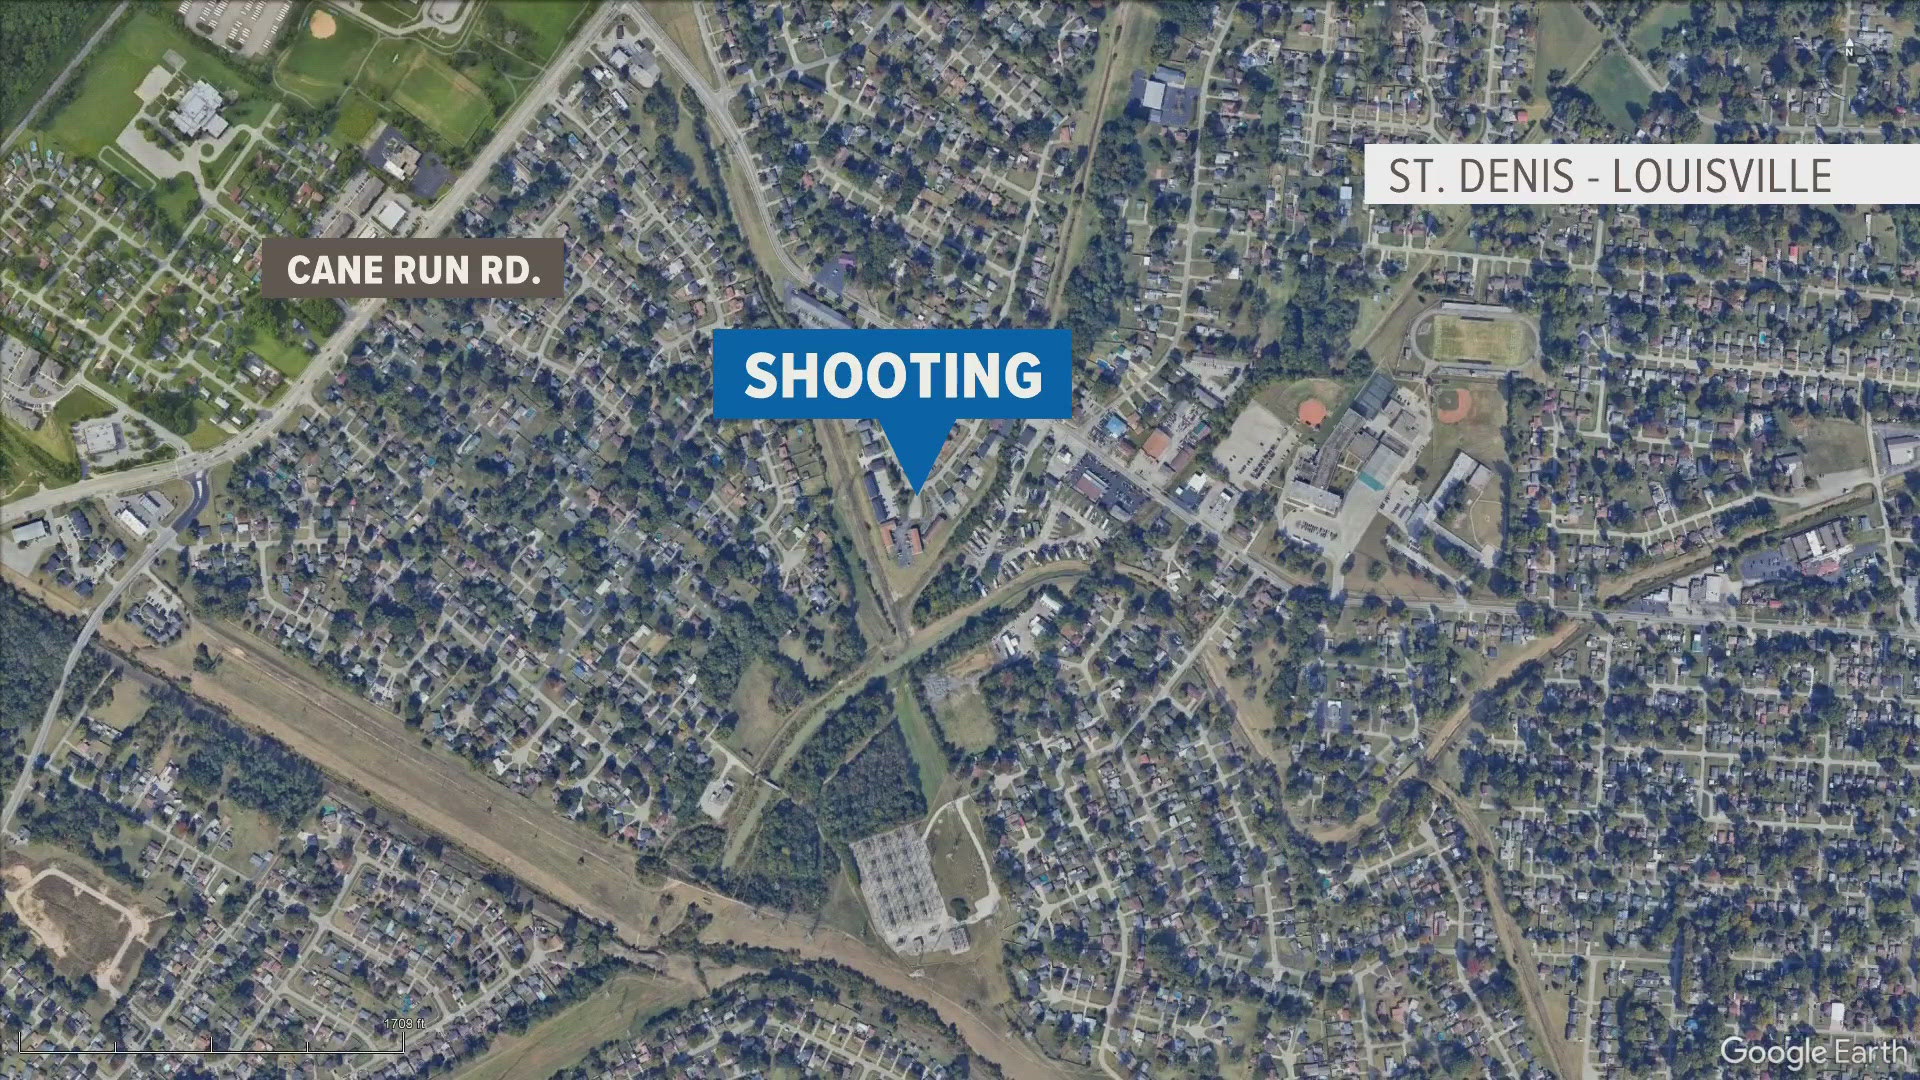 Police said they responded to the reported shooting on Saddlebrook Lane just after 3 p.m.